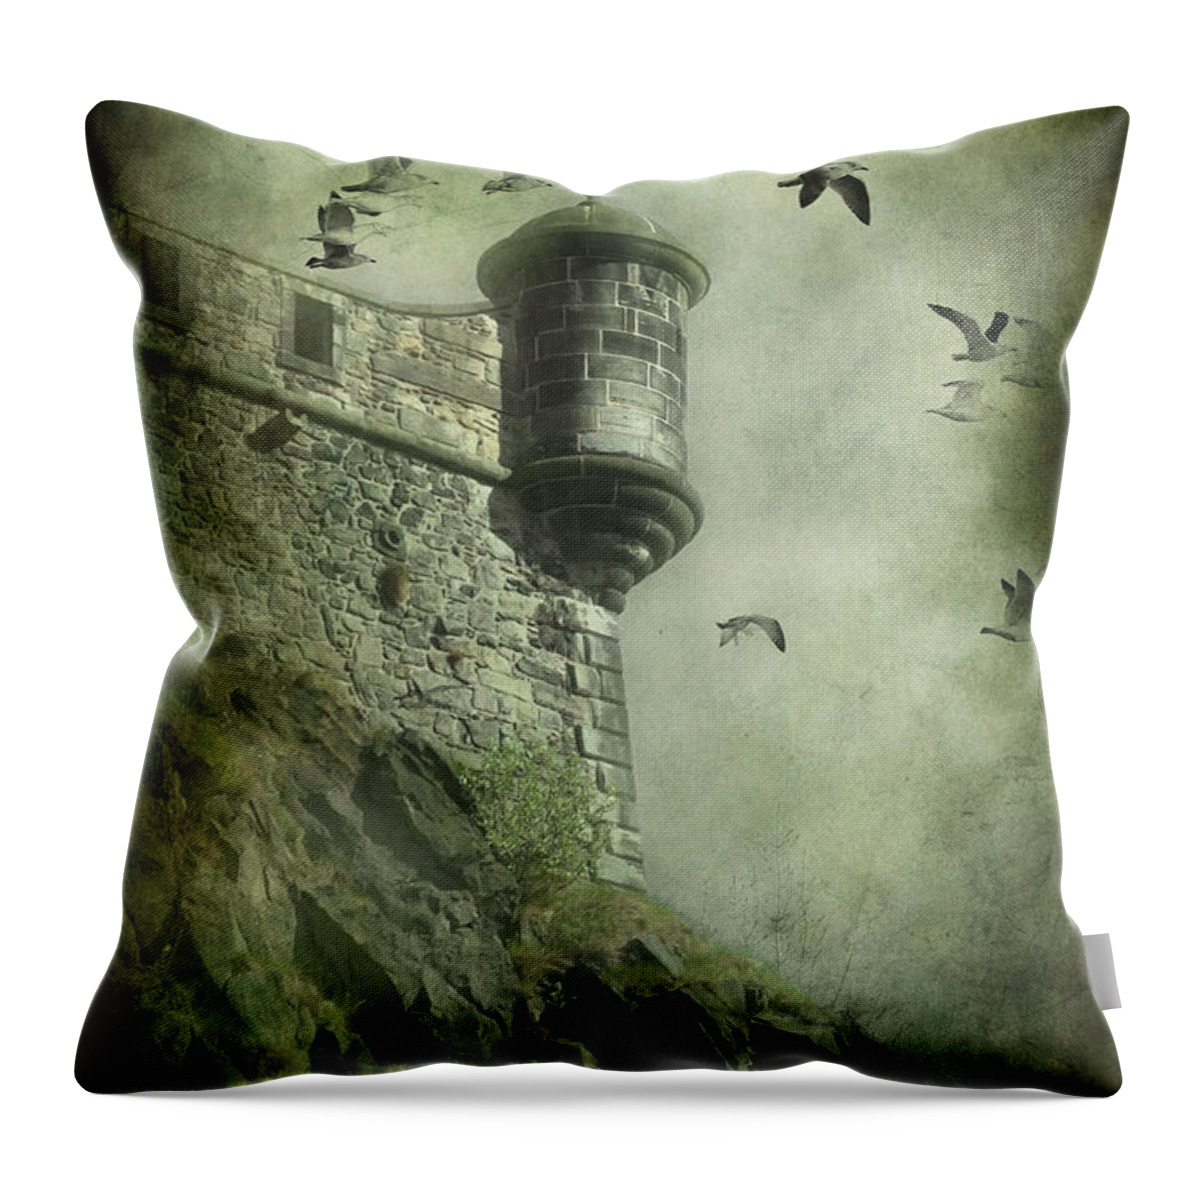 Abandoned Throw Pillow featuring the digital art At the Top by Svetlana Sewell